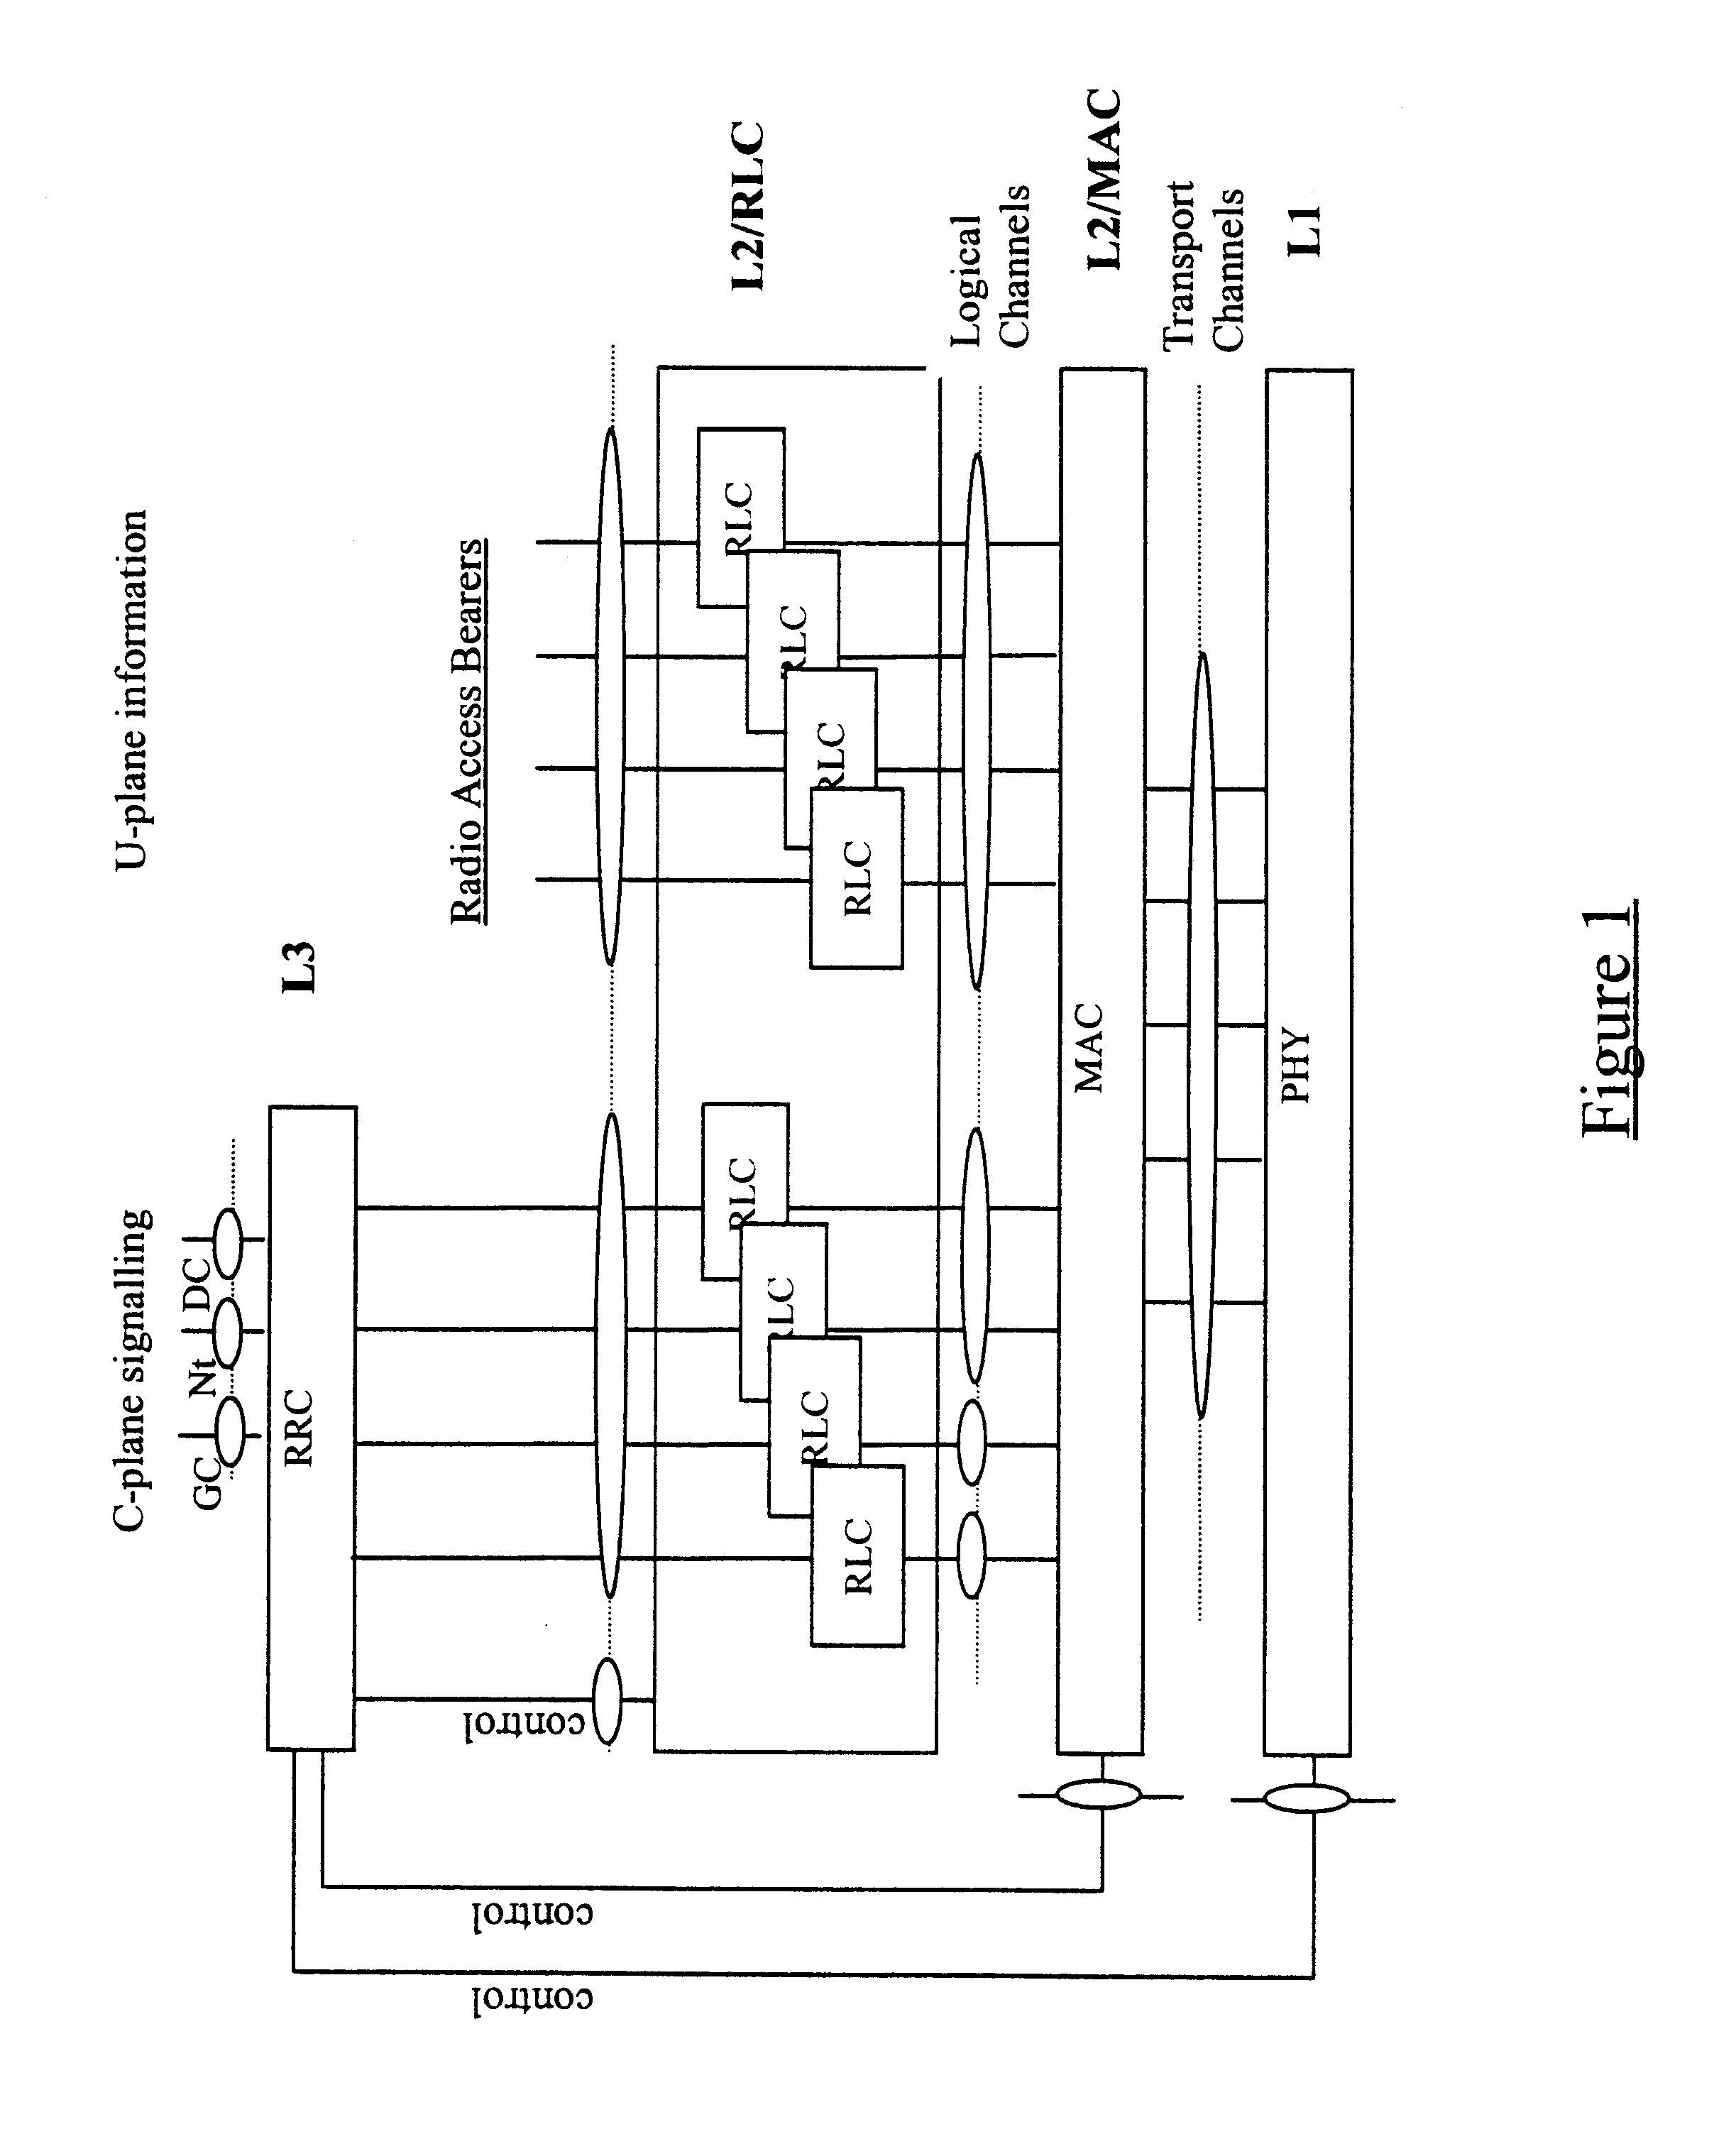 Data transmission in a telecommunications network